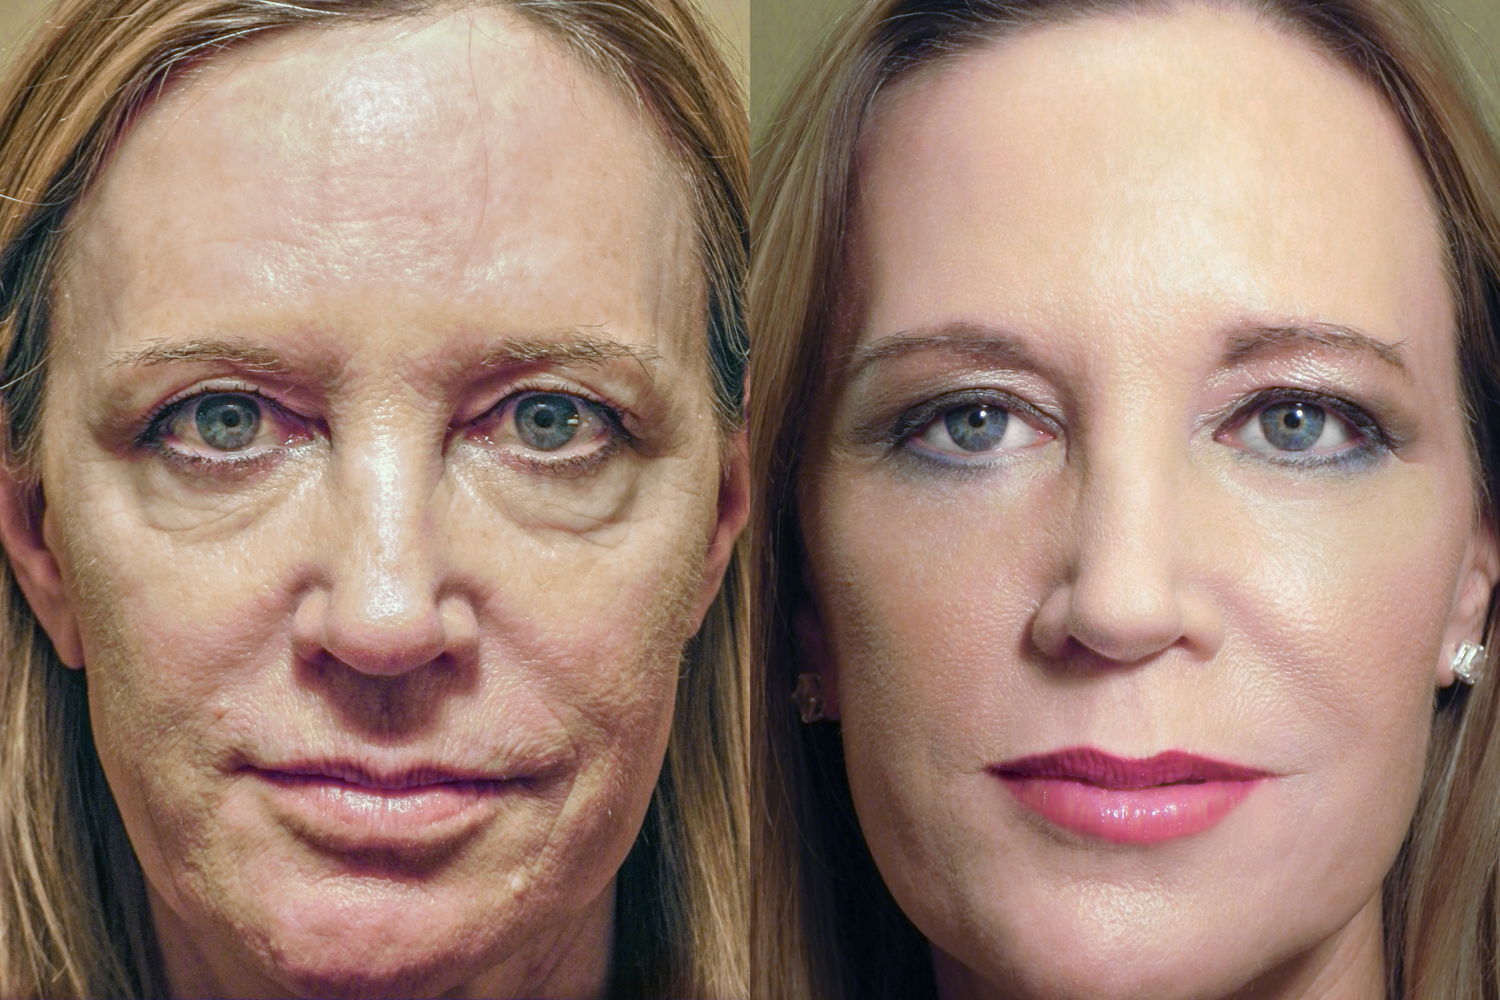 RESET patient before and after surgery with make-up. 